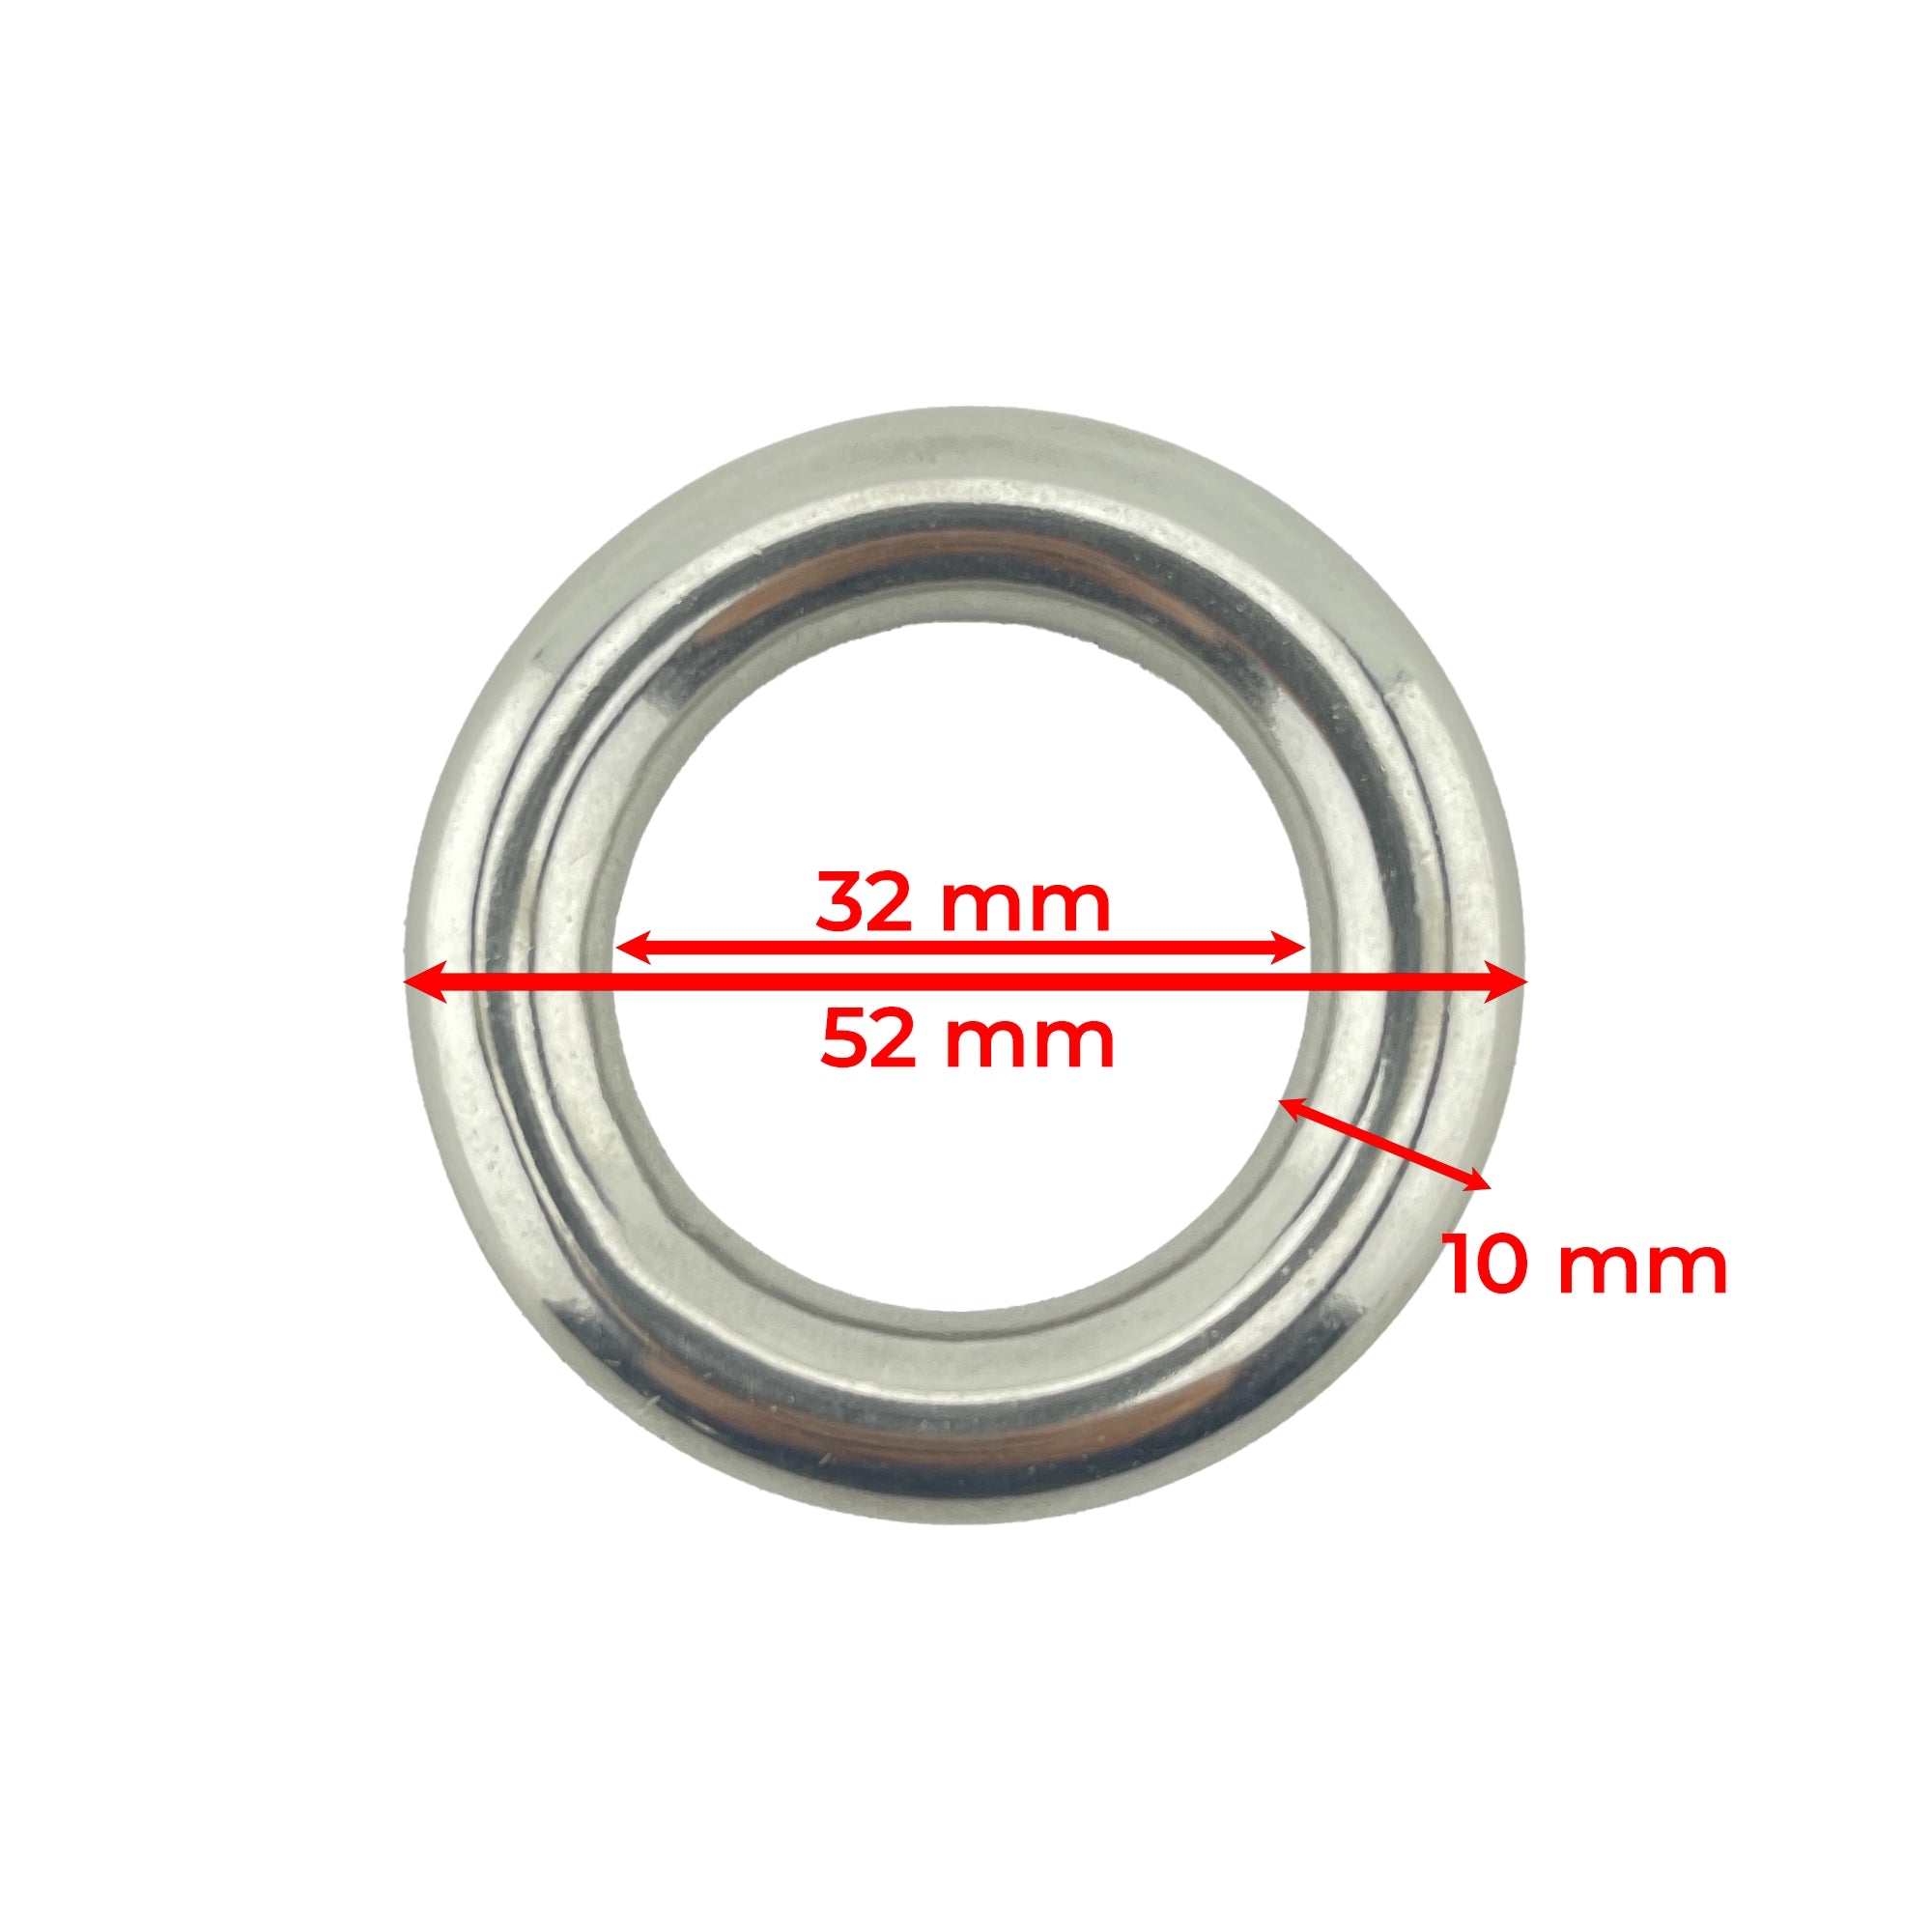 Stainless Steel Rappel Ring